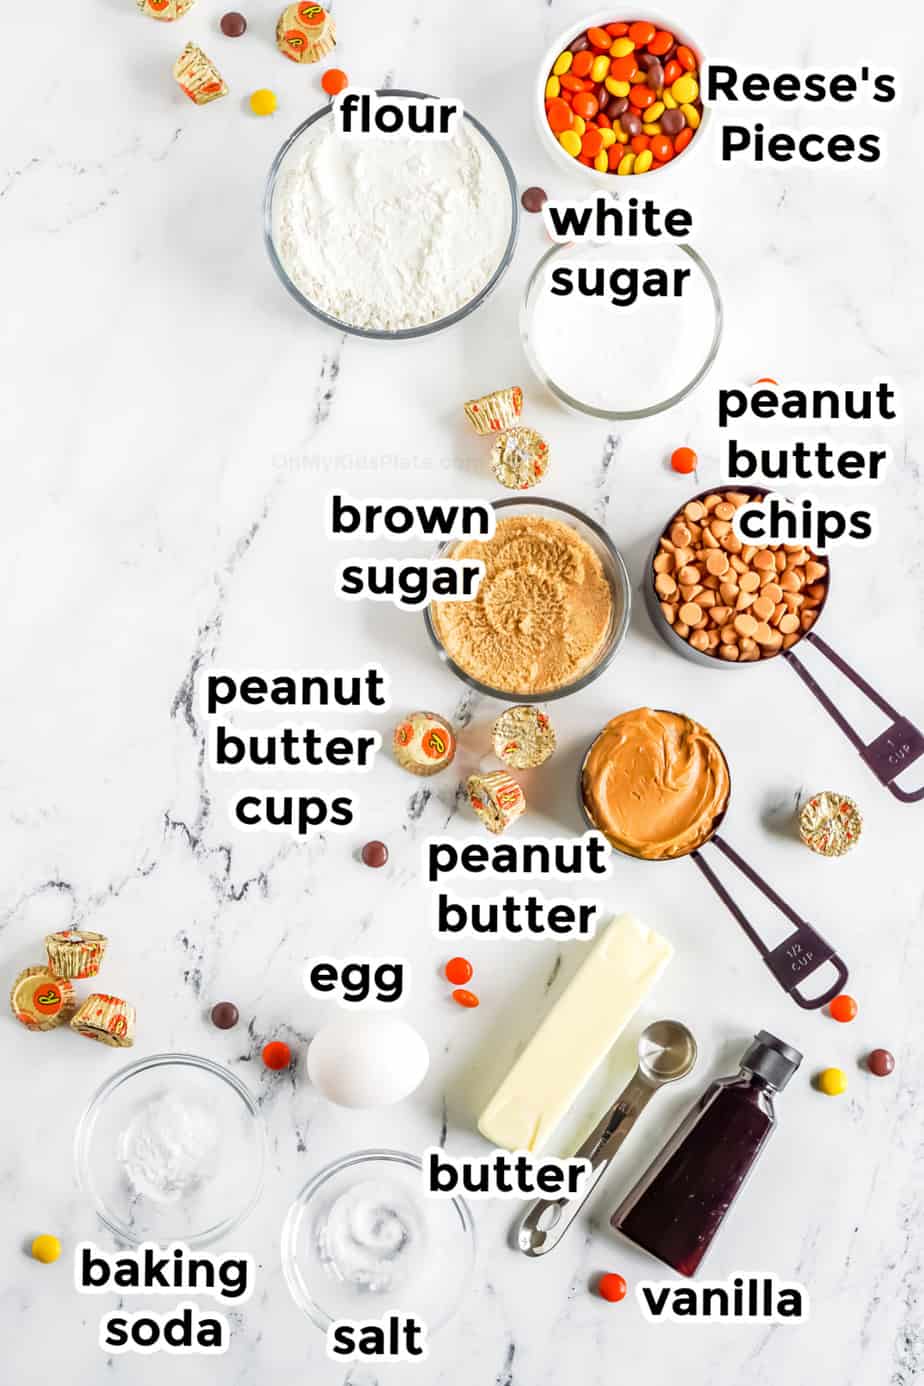 Ingredients in bowls for Reese's Pieces Peanut Butter Chip Cookies from above labeled.